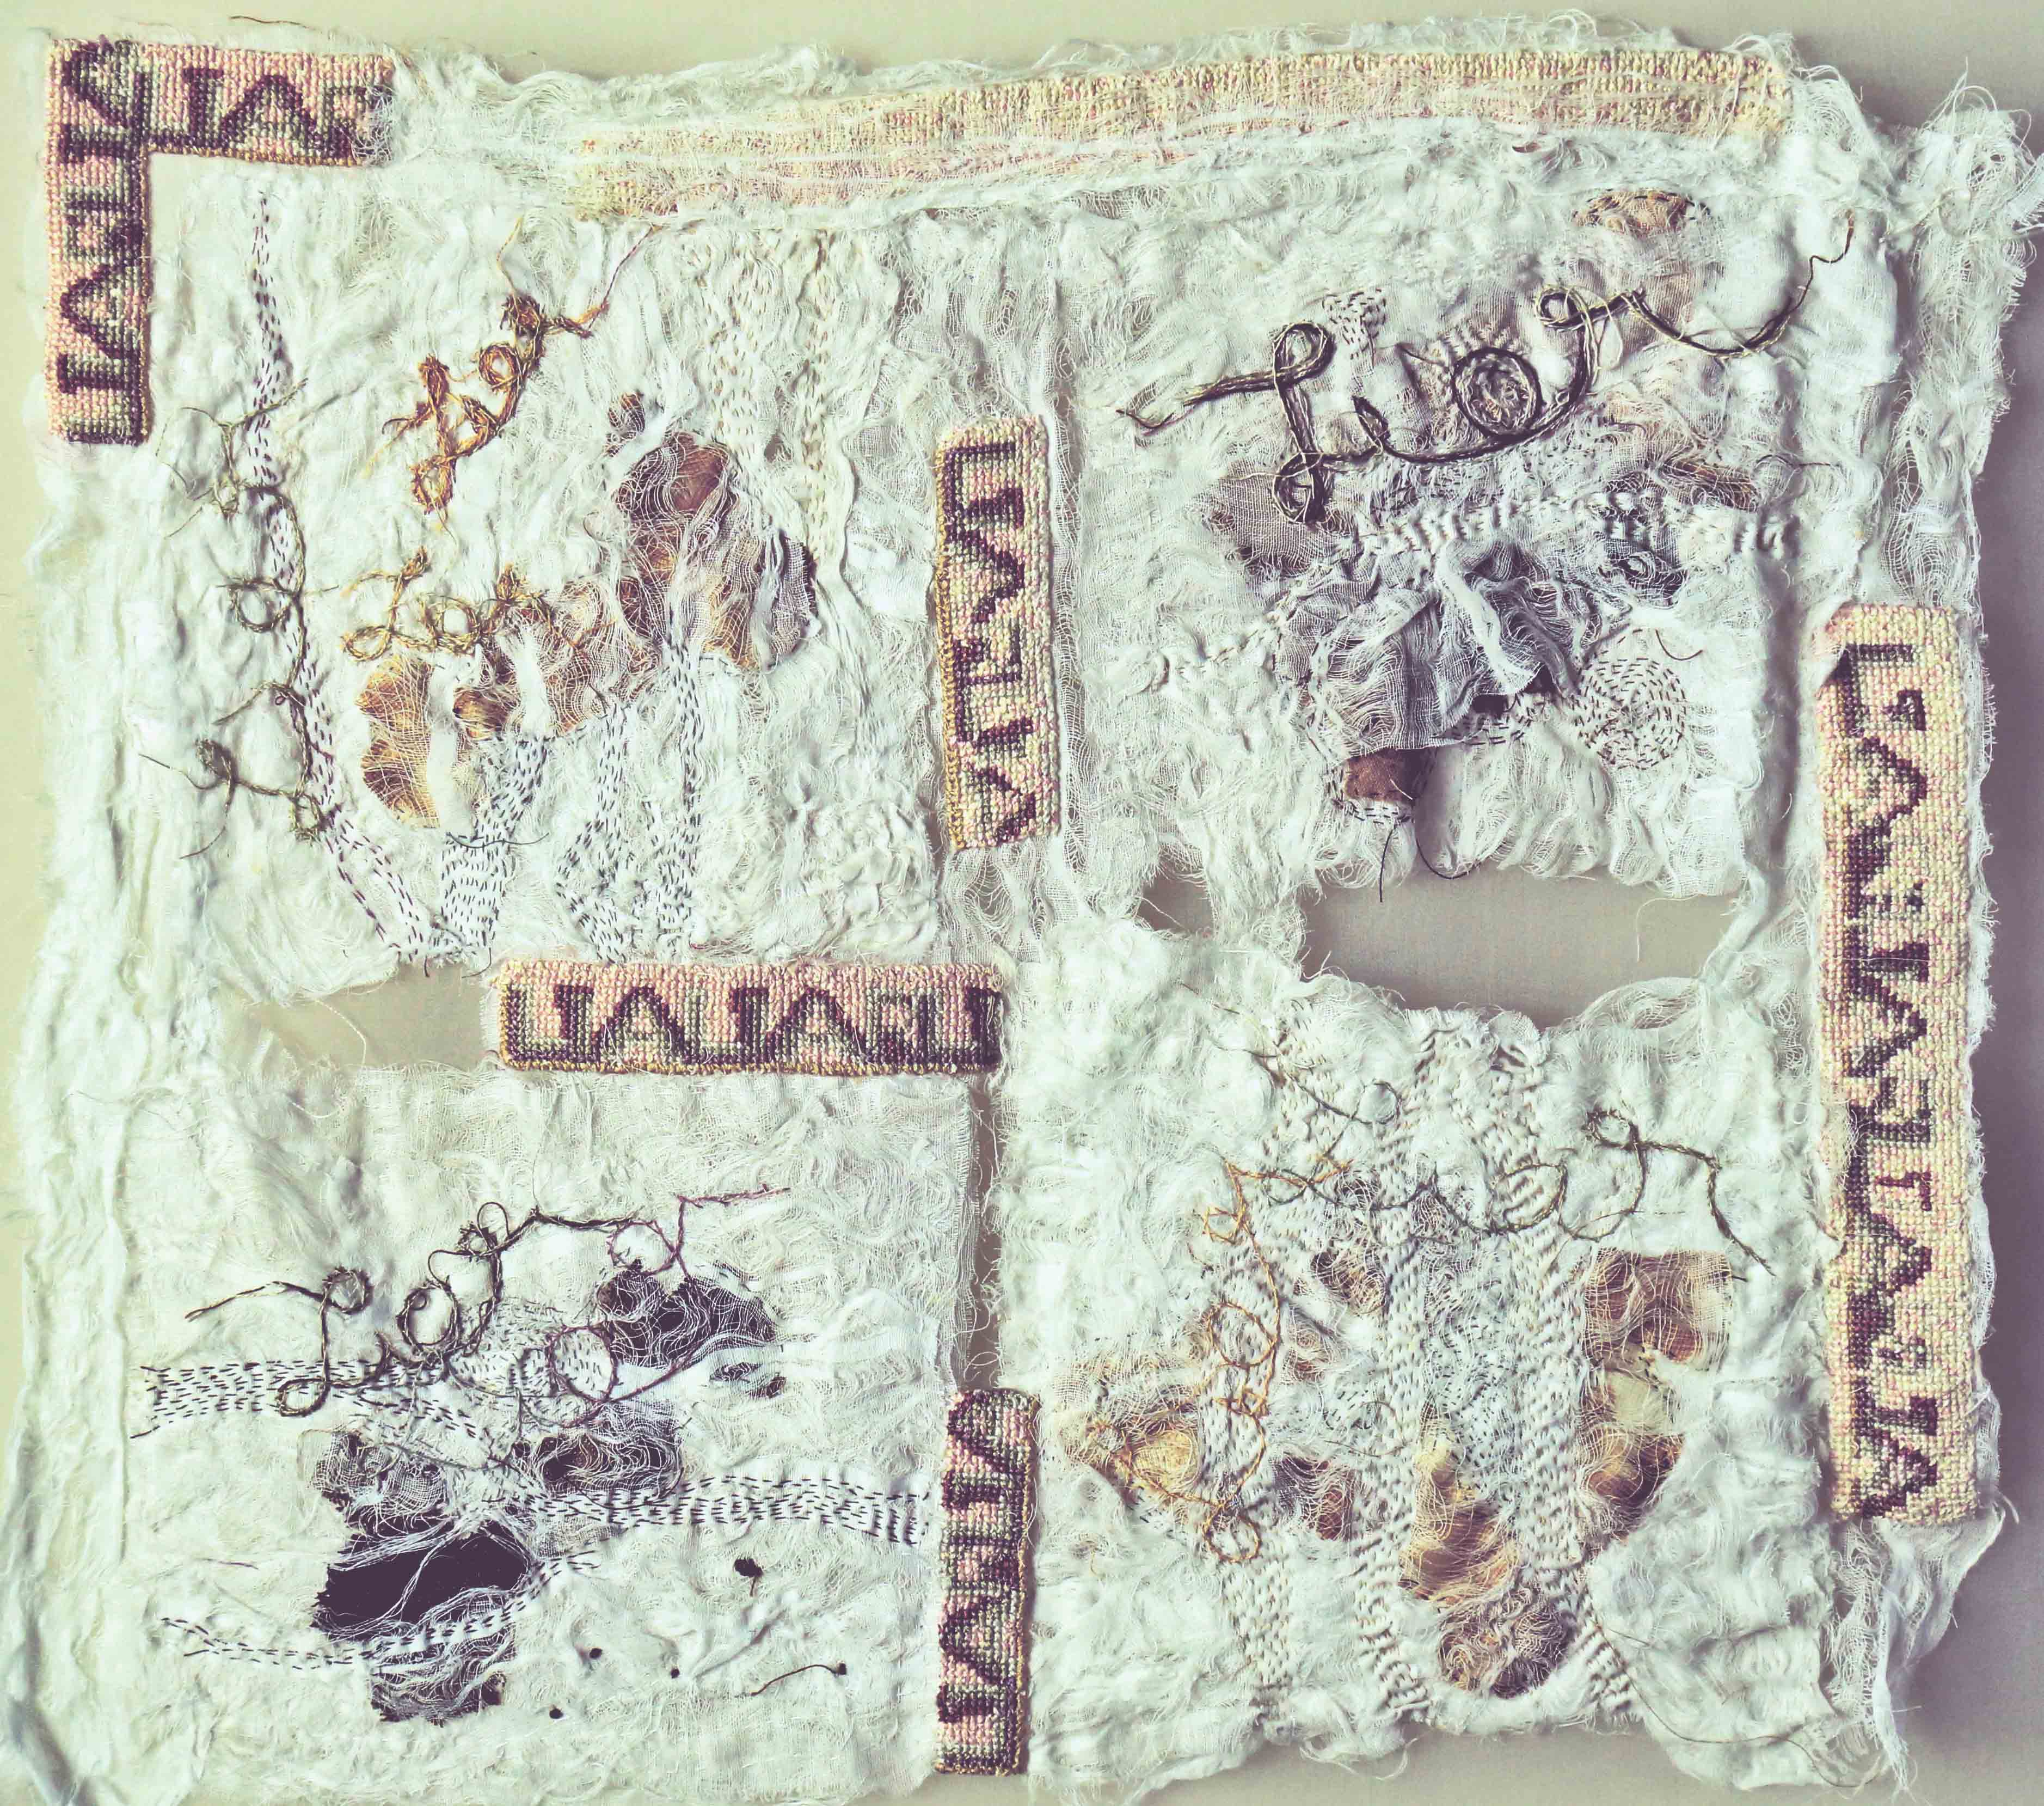 Word-Stains I, Lair, 2014, [16 x 18 inches - unframed], Materials: cotton fabrics, cotton floss, cotton-polyester thread, Technique: layering, tearing, pulling, stitching, staining with tea-leaves, embroidery